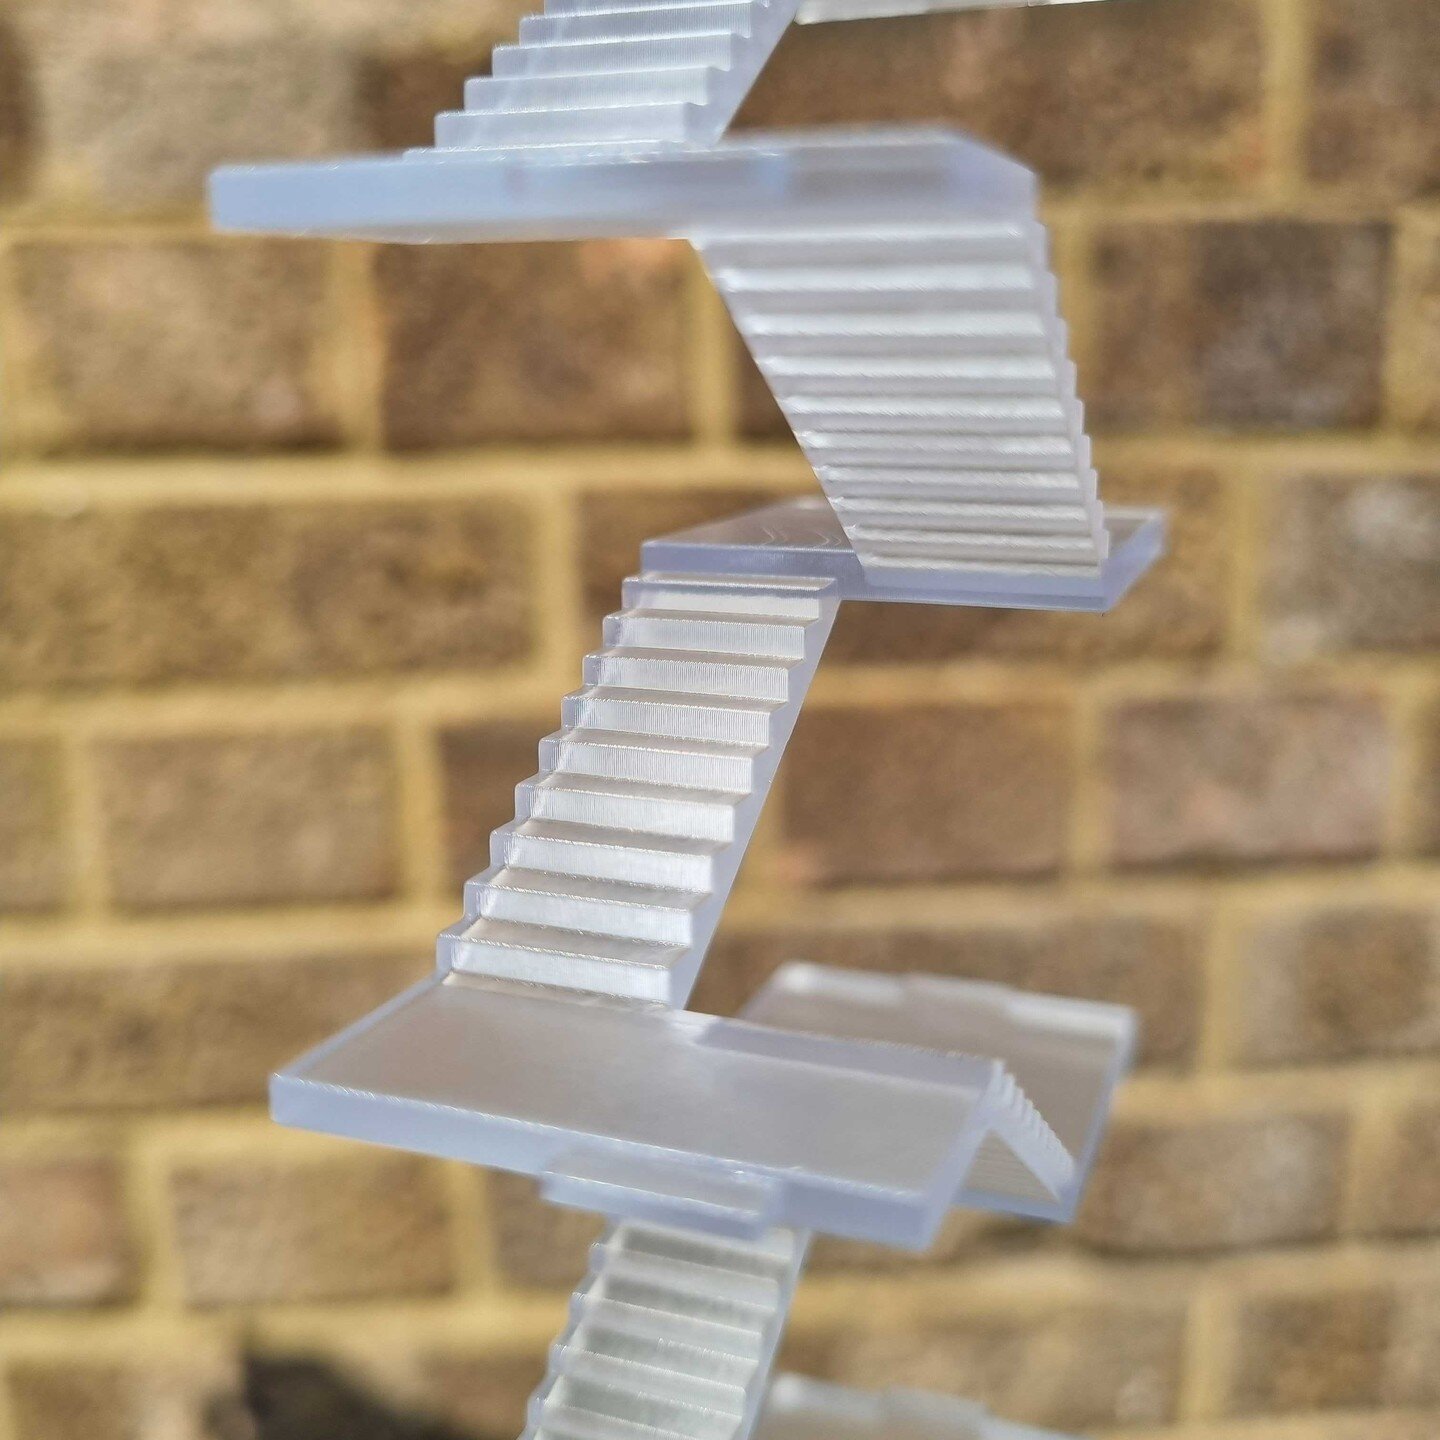 #3dprinting as a tool for #modelmaking speeds up the process. Just download a staircase, choose the scale and press print!